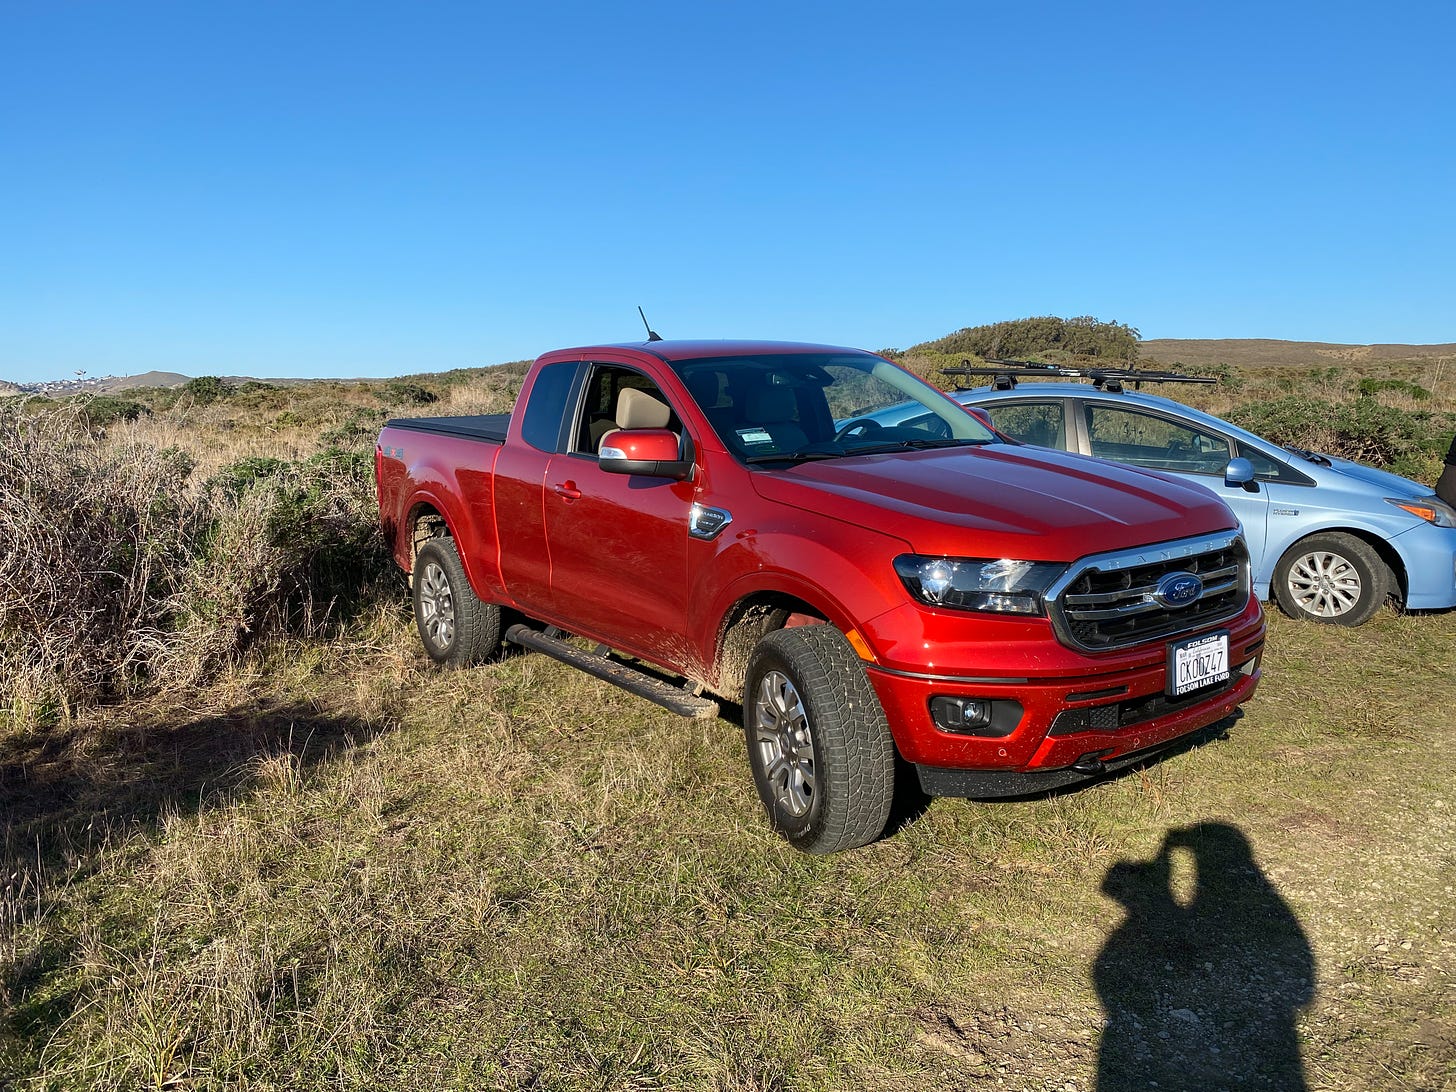 A red Ford Ranger 4x4 truck.